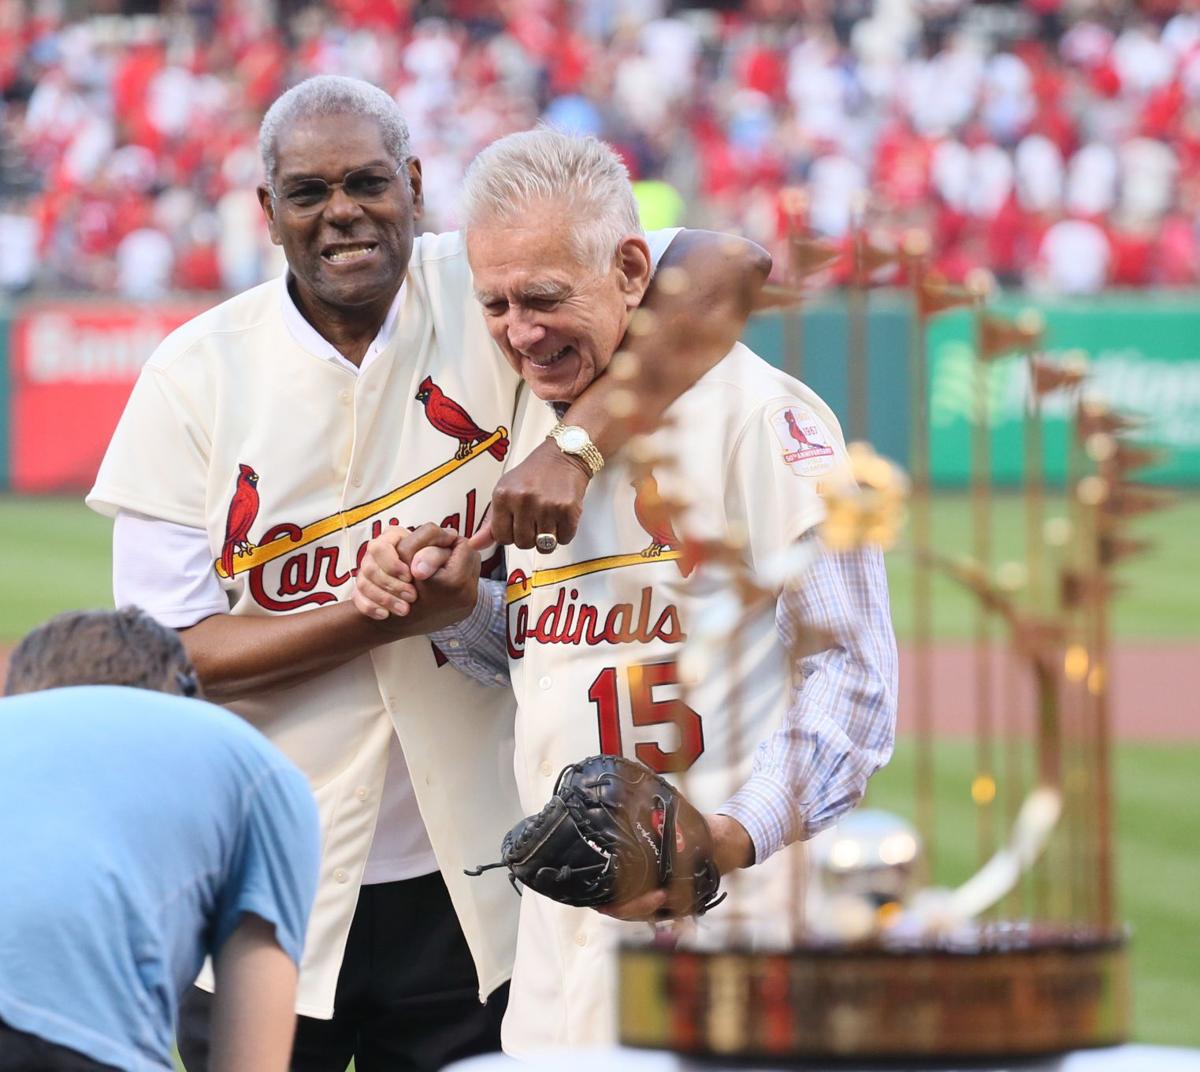 Photos: 1967 World Series champion Cardinals are saluted | St. Louis Cardinals | nrd.kbic-nsn.gov